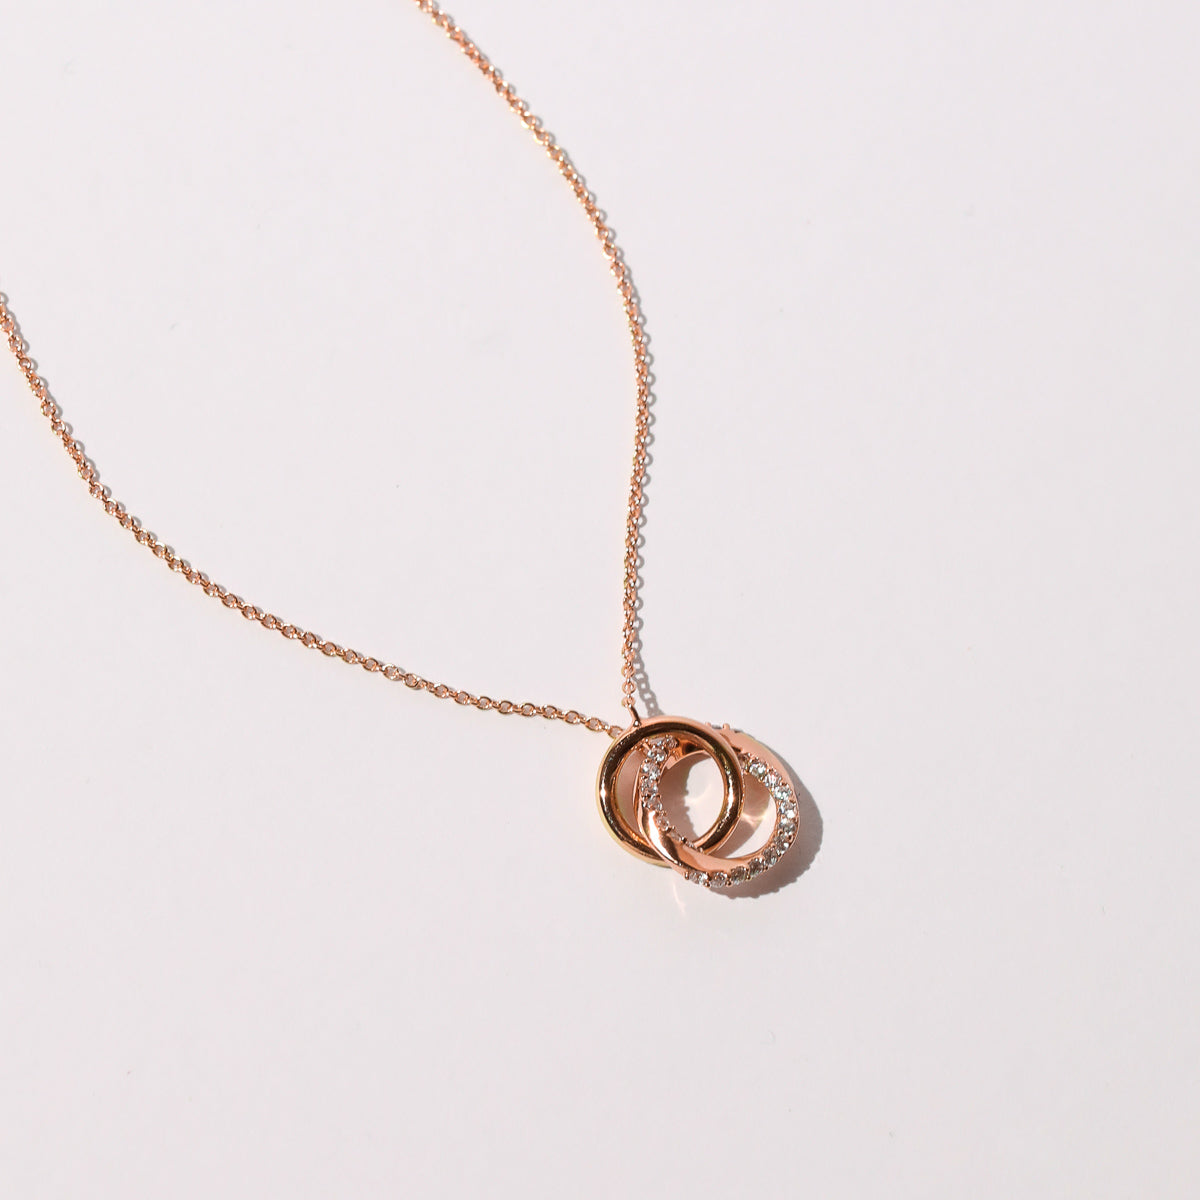 Orbit Crystal Chain Necklace in Rose Gold